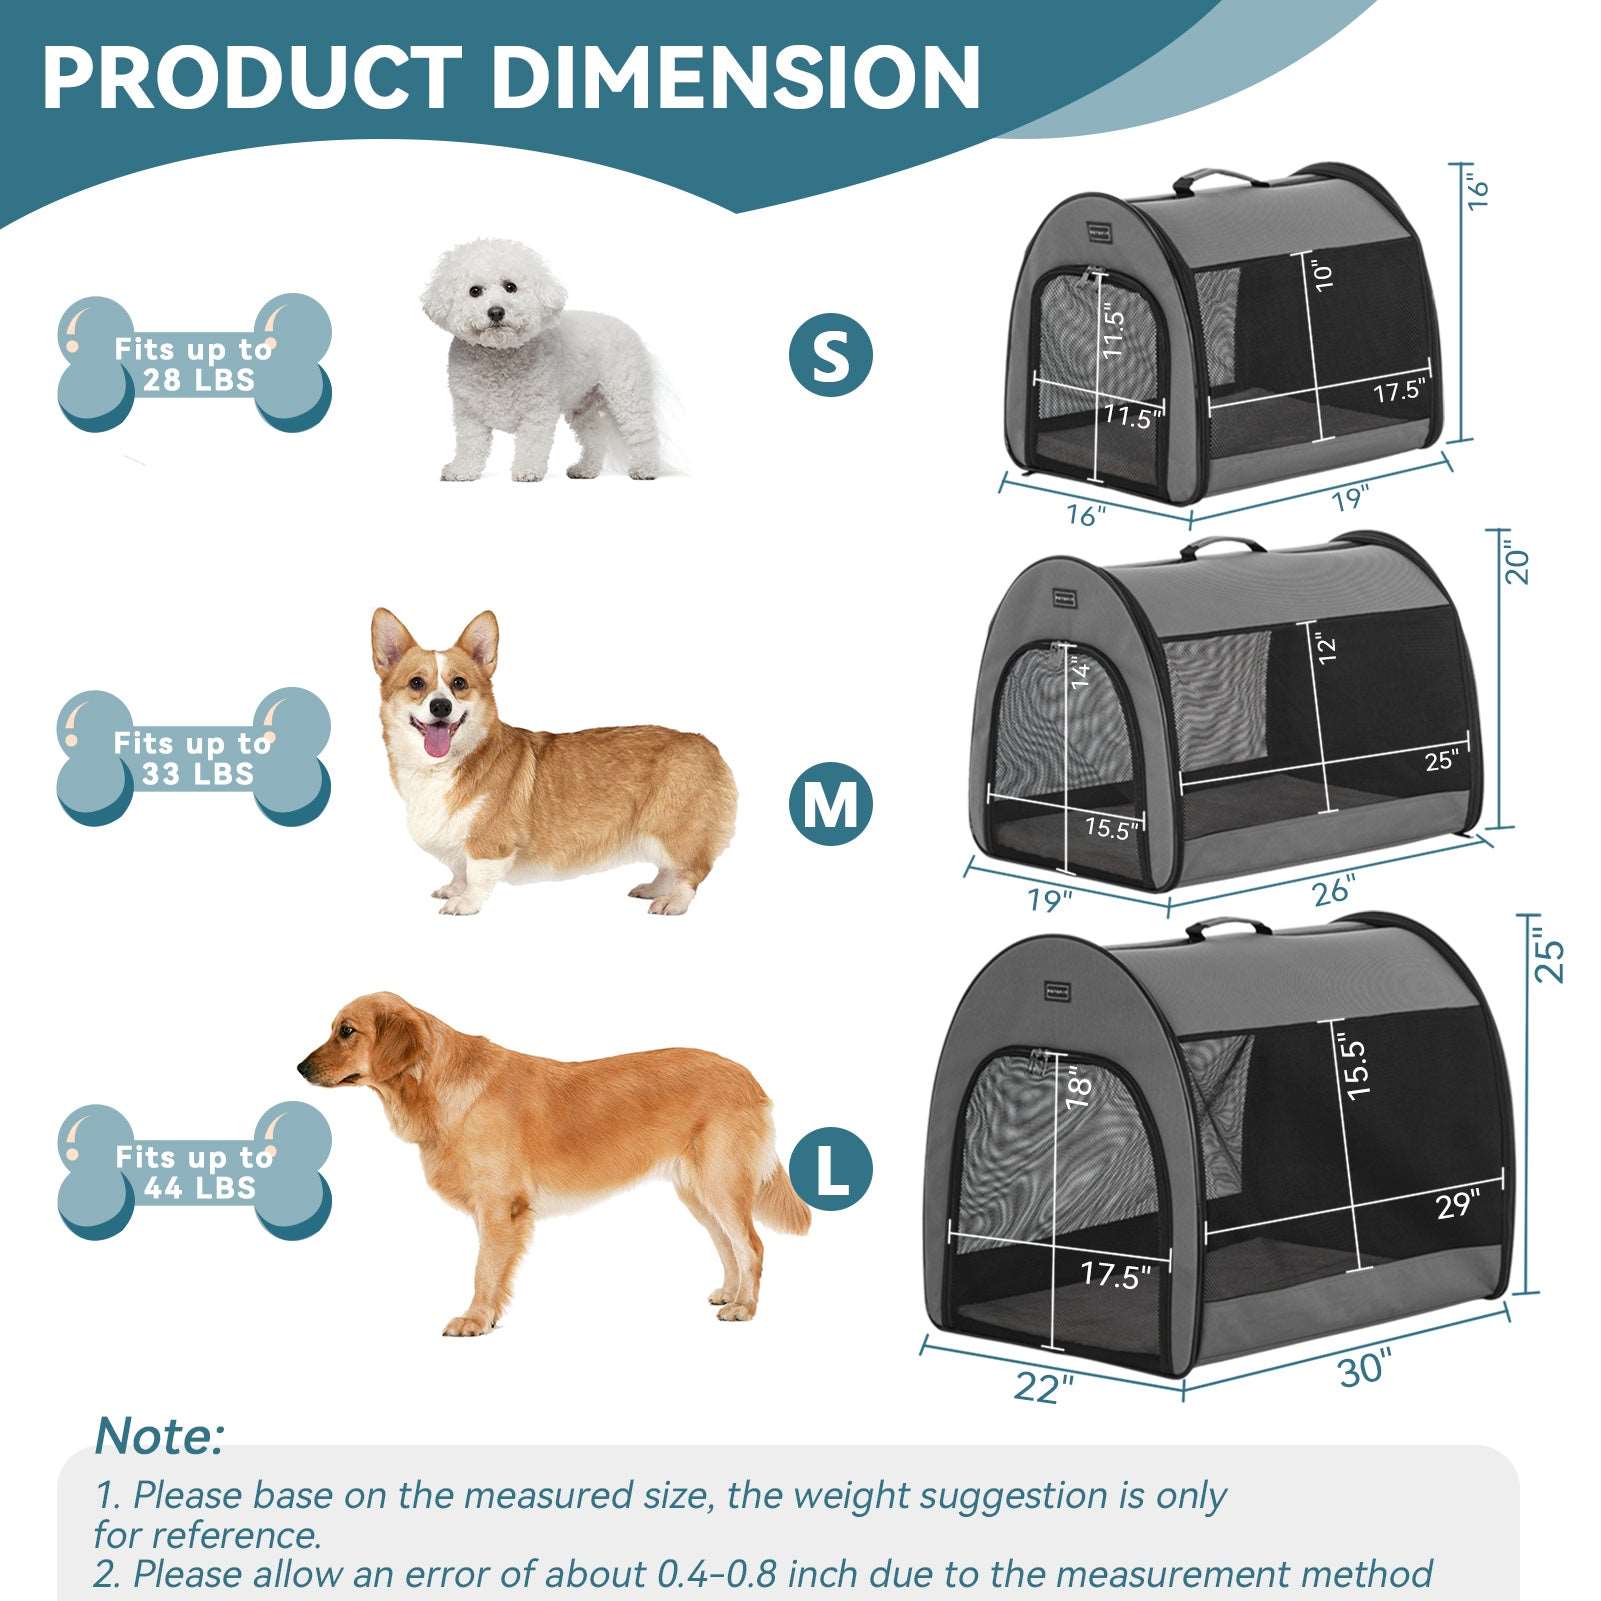 PETSFIT Arch Design Soft Sided Portable Dog Crate